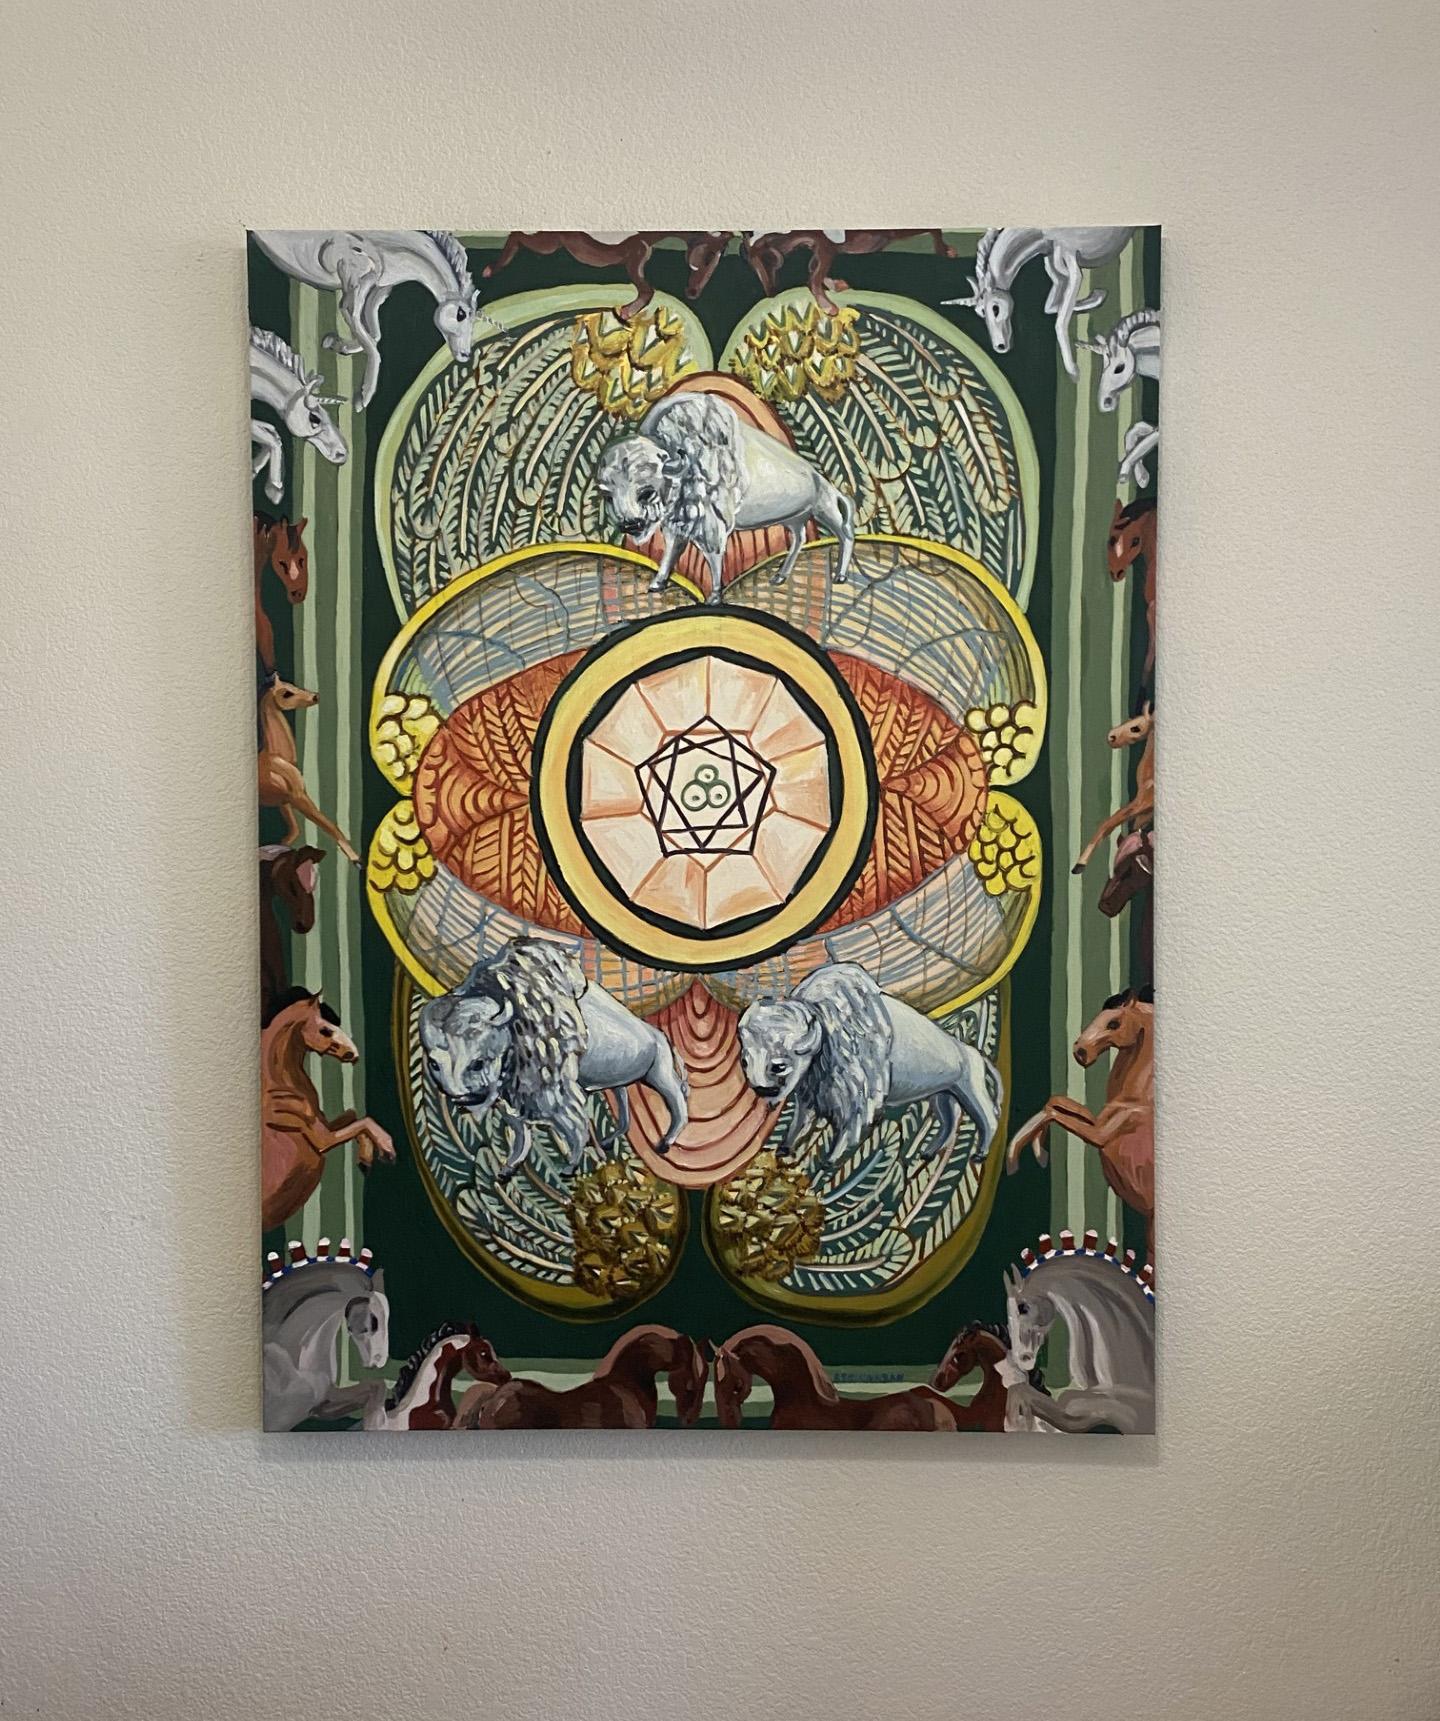 <p>Artist Comments<br />As part of her Rodeo Tarot series, artist Rachel Srinivasan reinterprets the pentacles suit, adorned with galloping horses on the edges. Three white bison form a triangular configuration around the center of the composition.